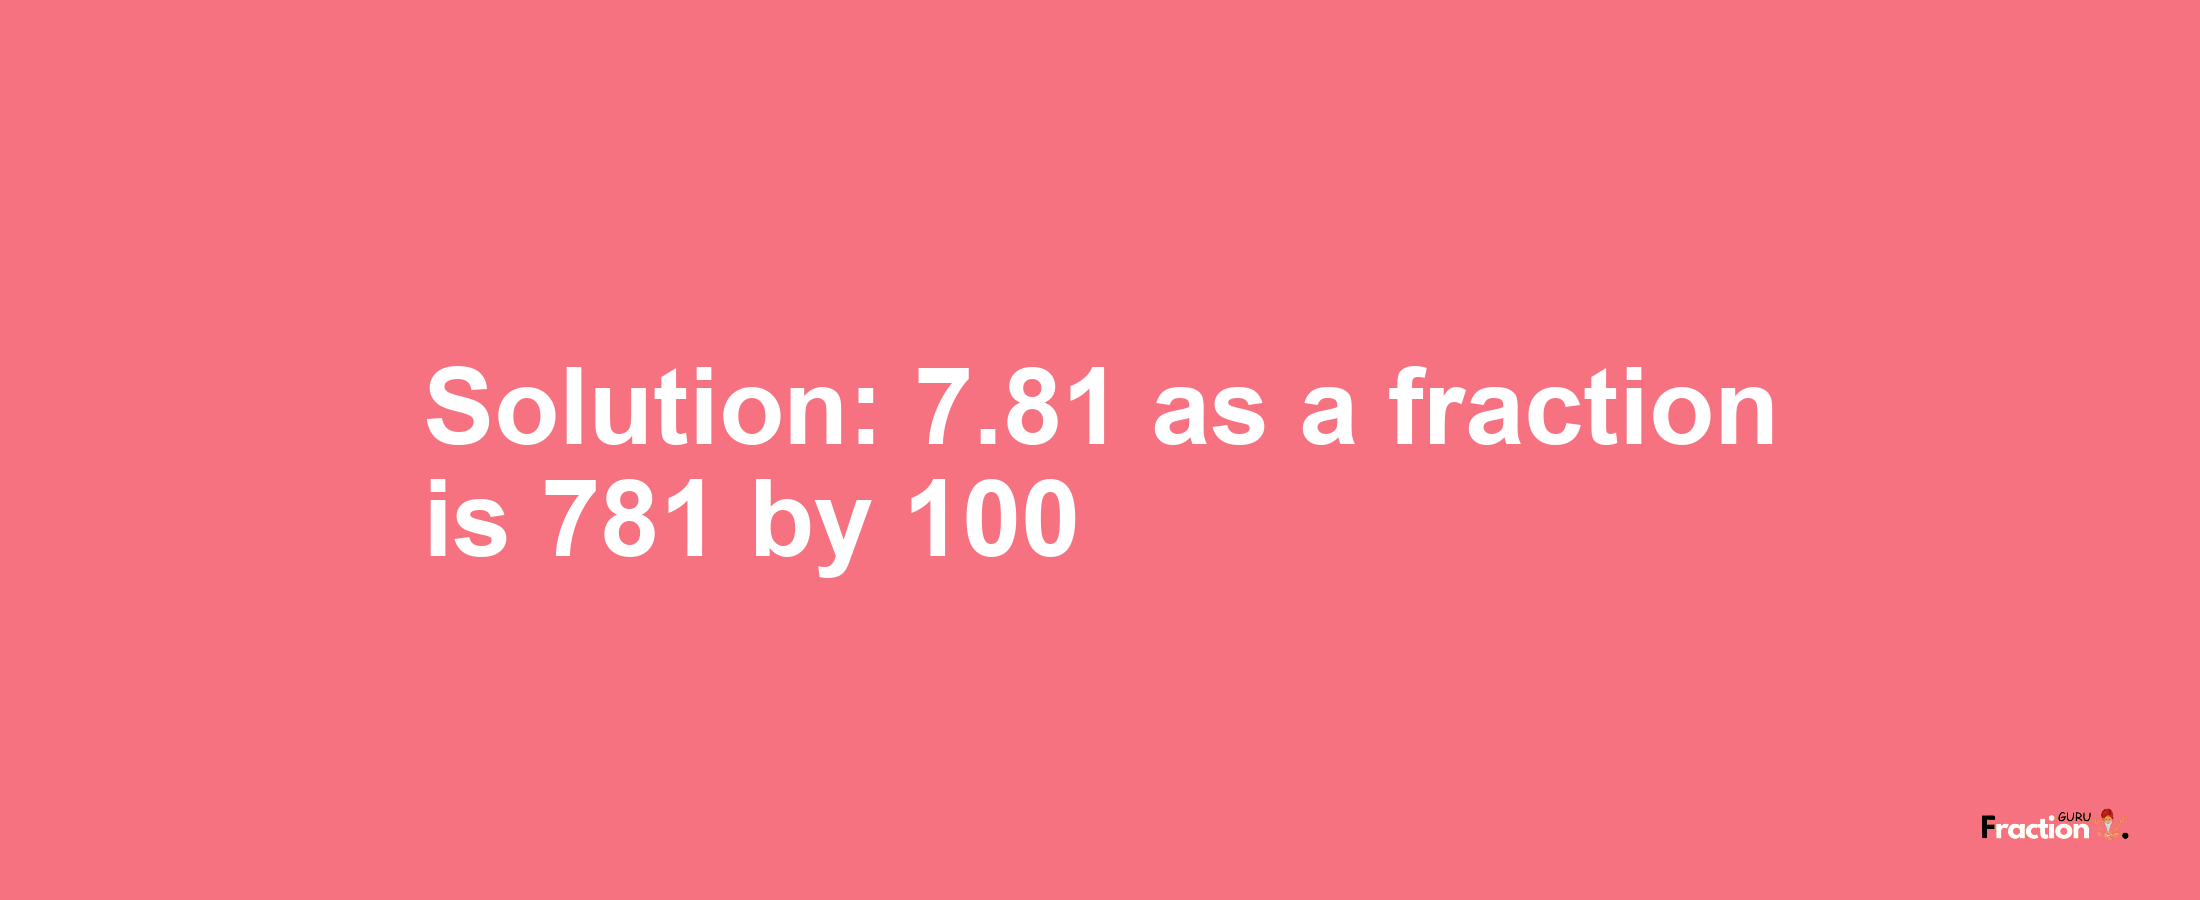 Solution:7.81 as a fraction is 781/100